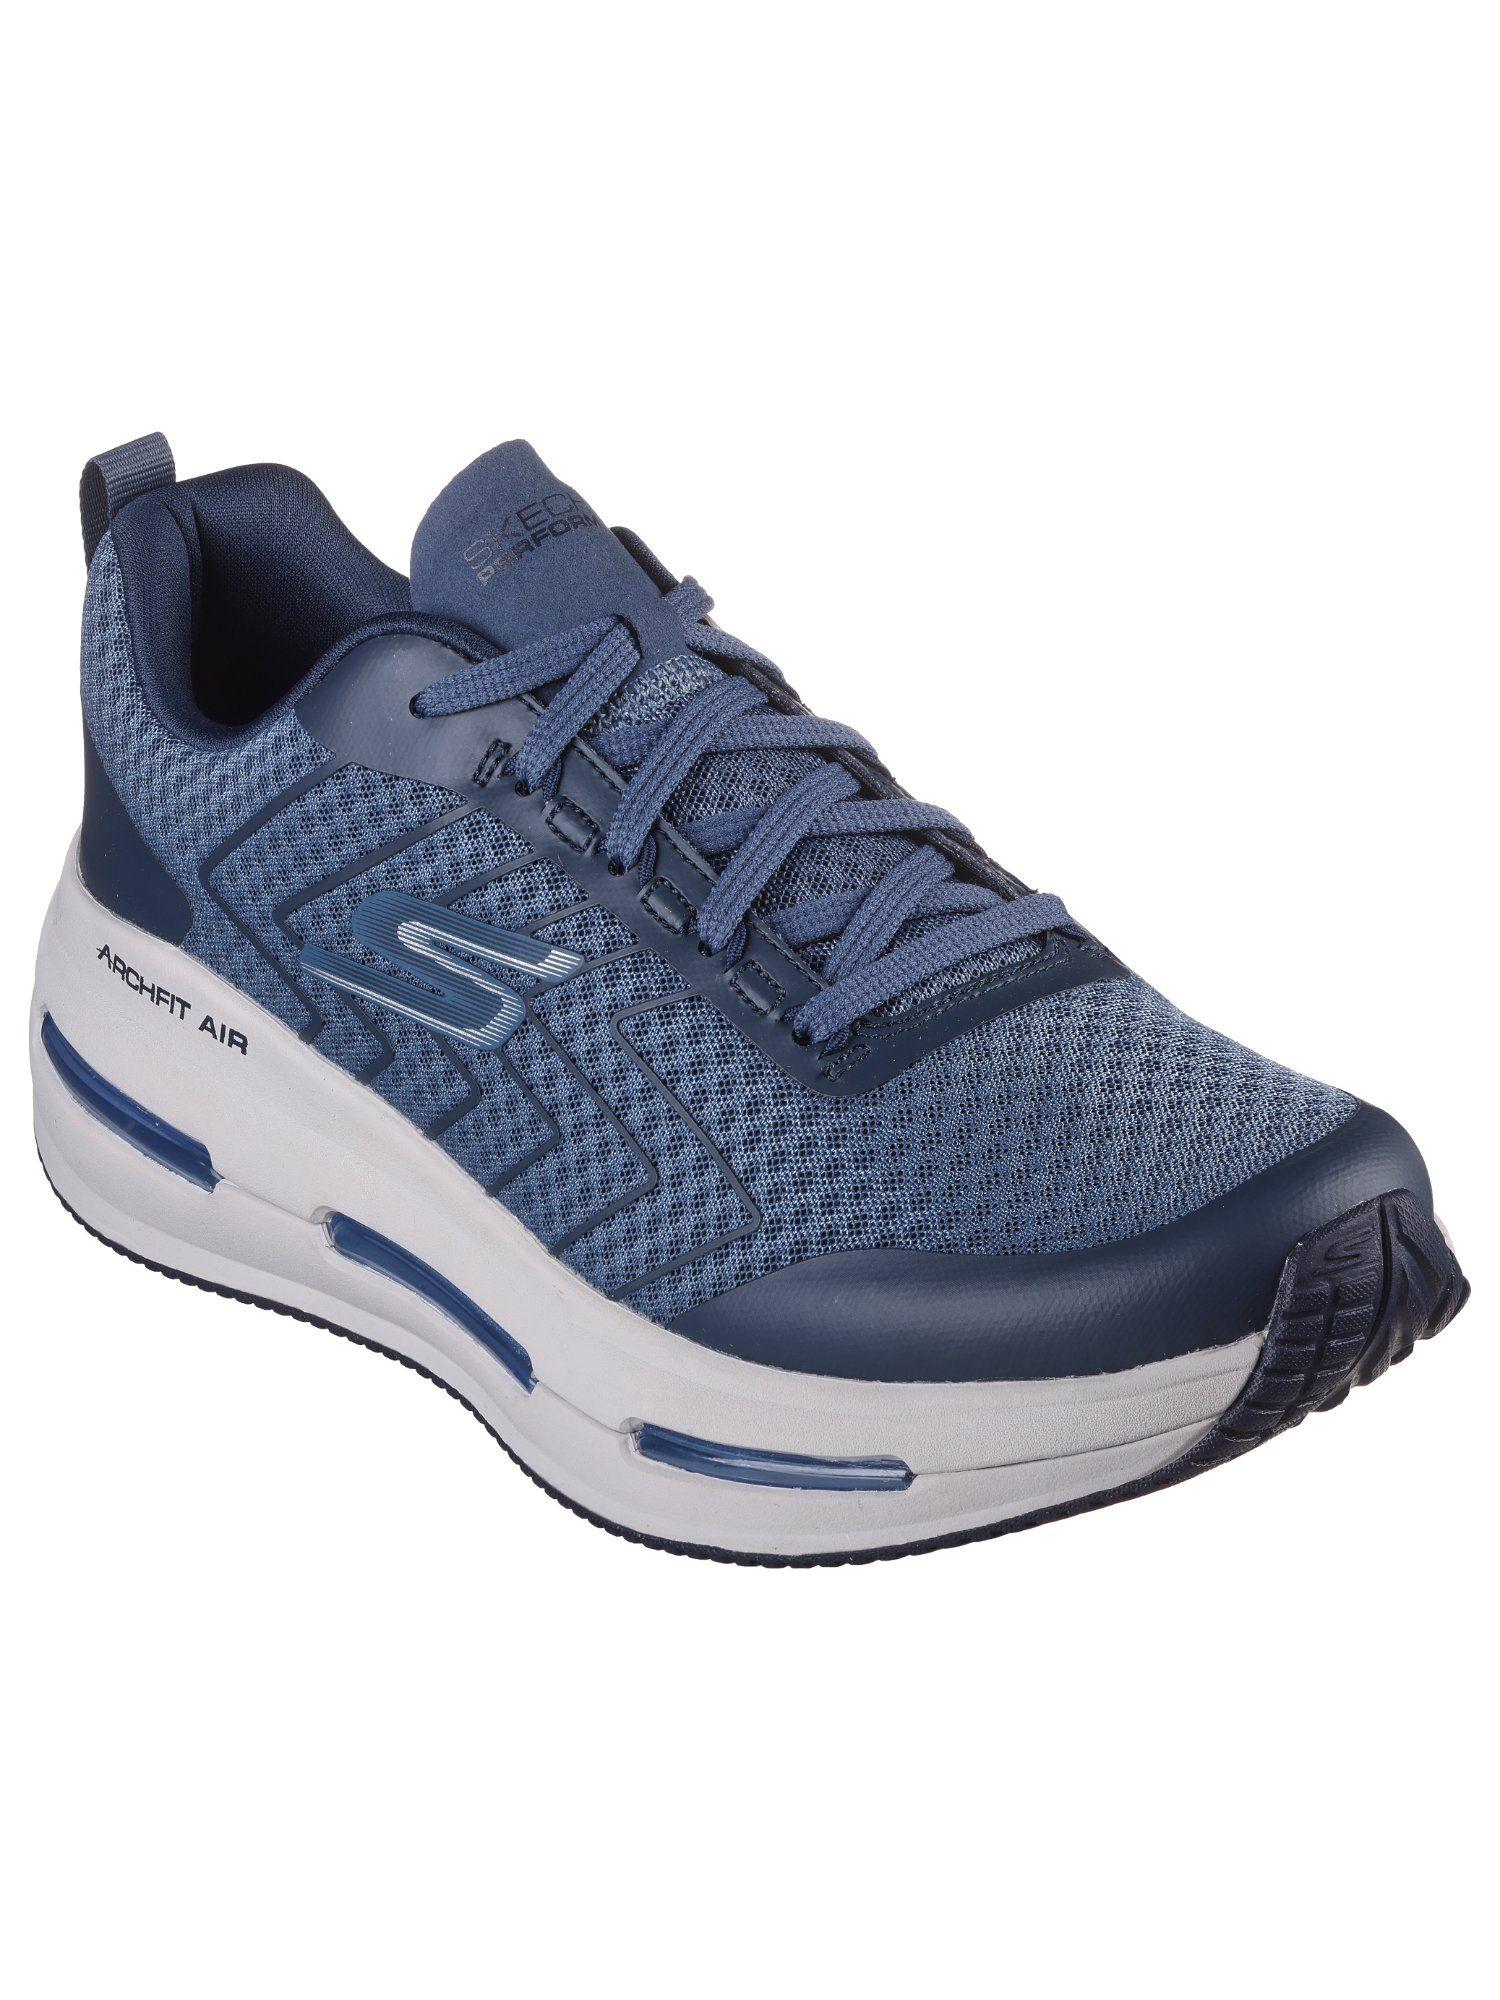 max-cushioning-arch-navy-blue-running-shoes